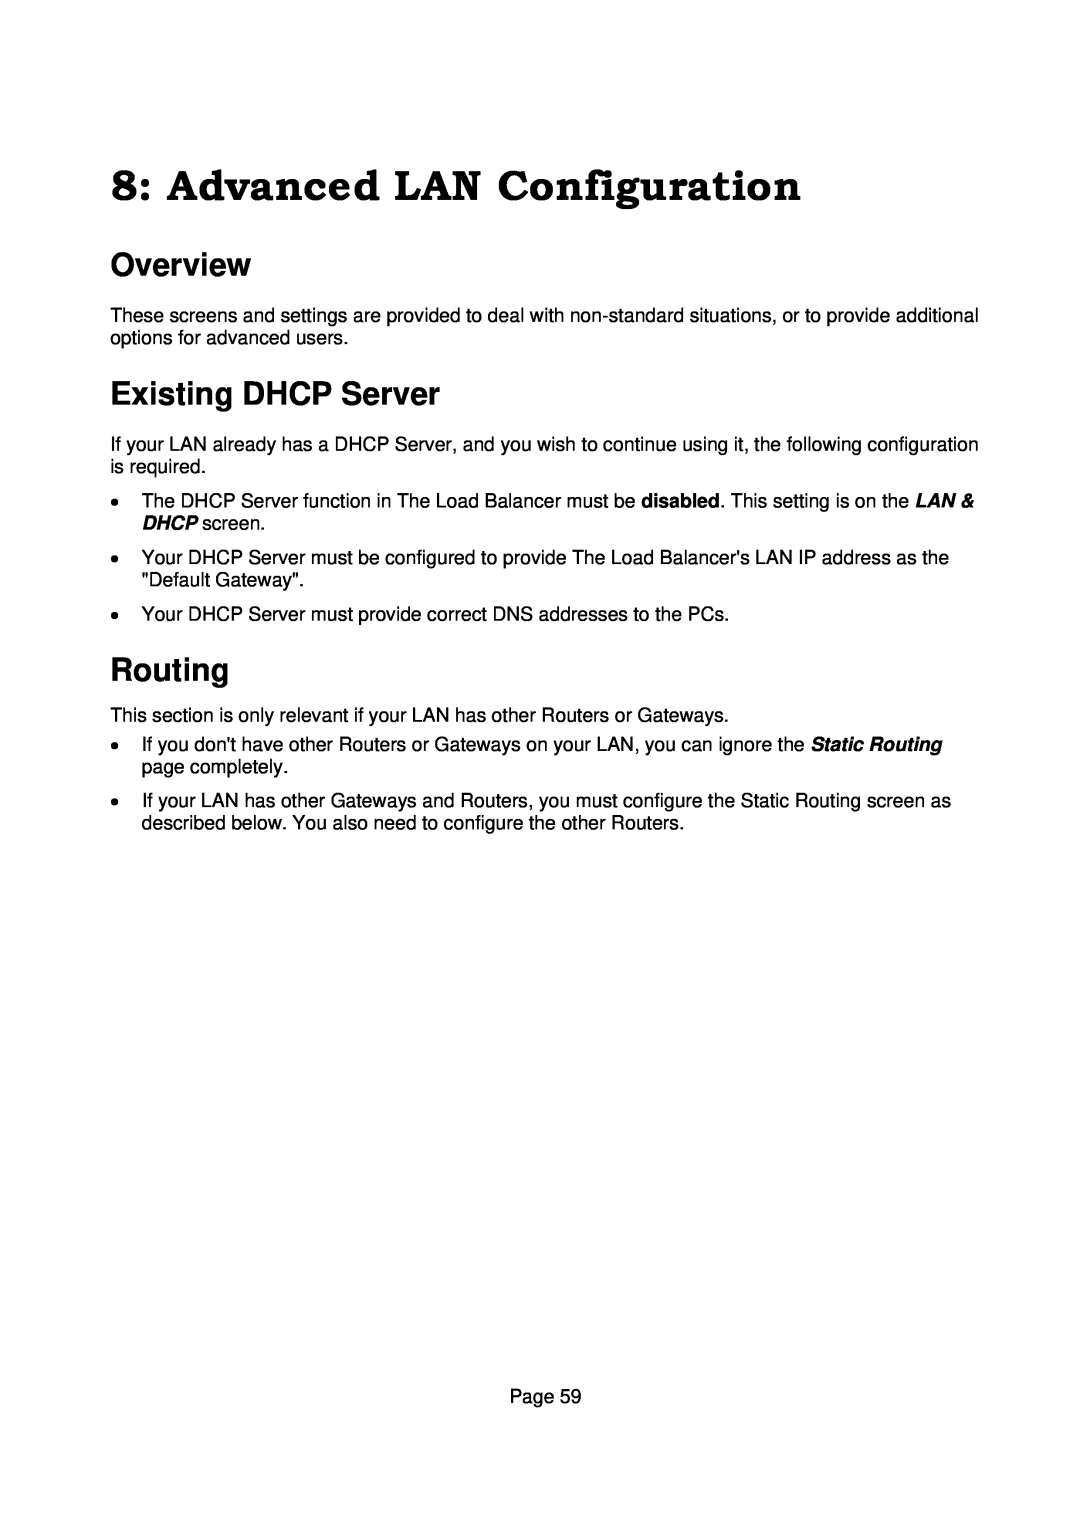 Edimax Technology Edimax user guide Router manual Advanced LAN Configuration, Existing DHCP Server, Routing, Overview 